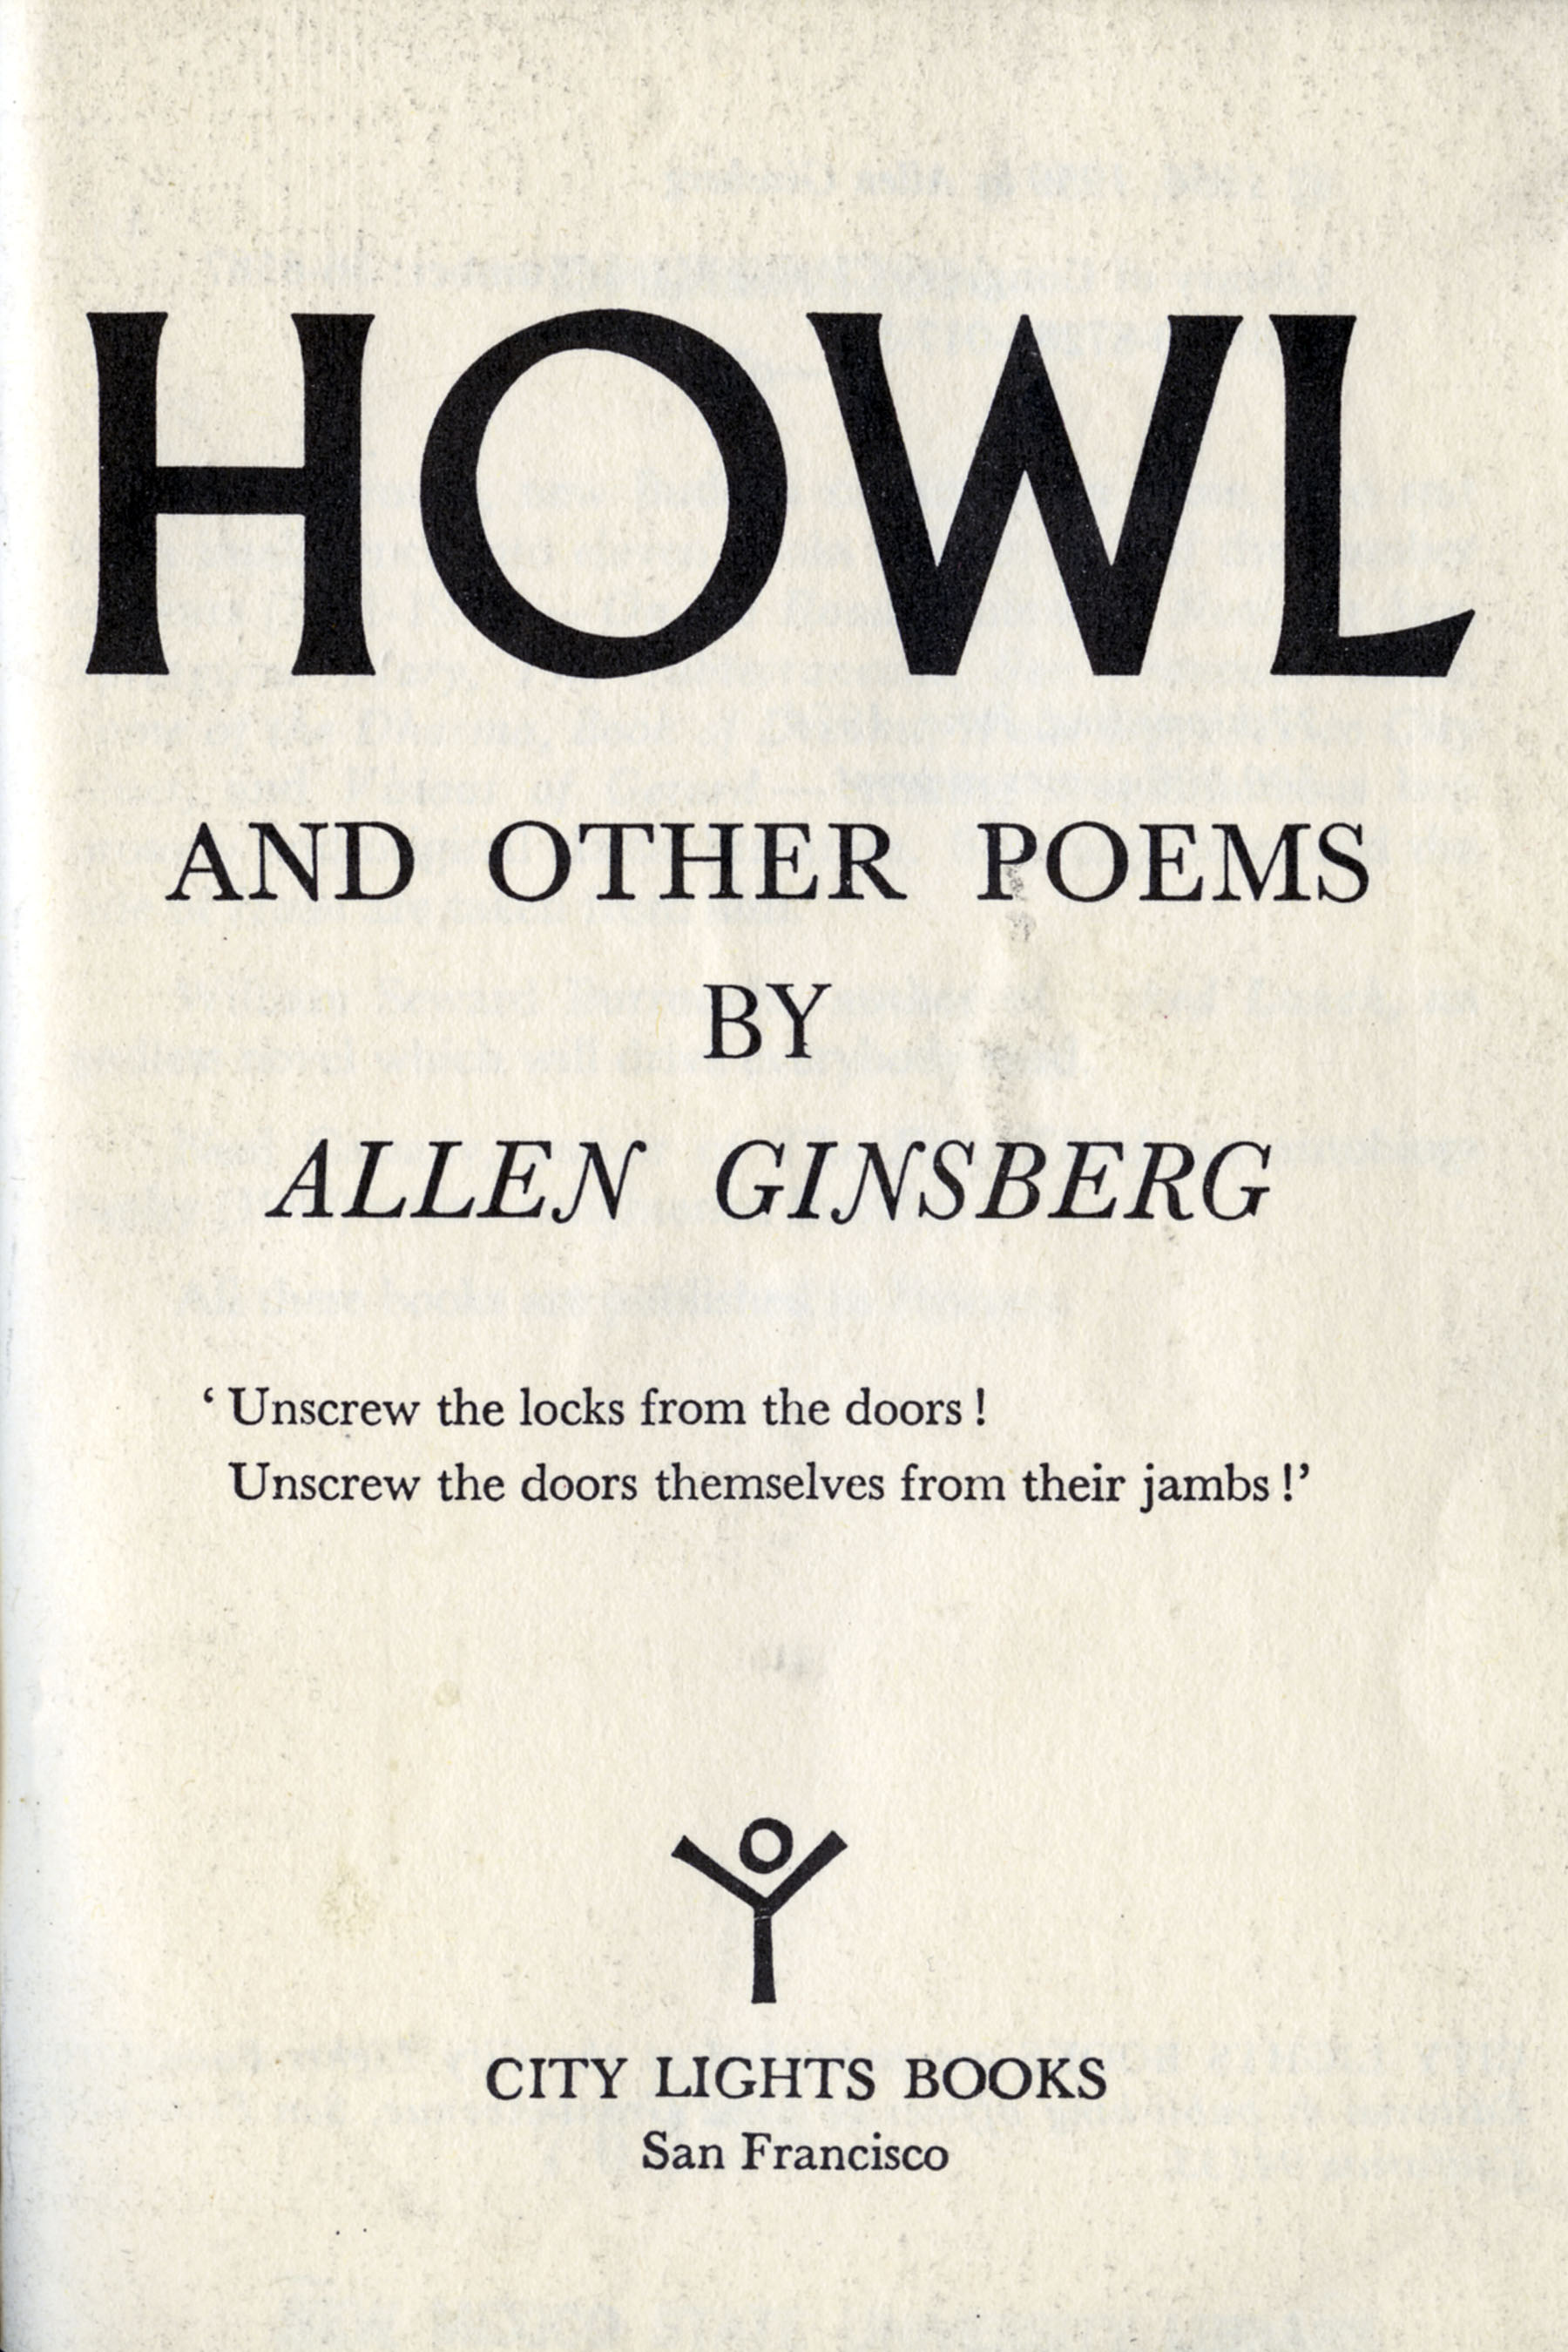 title page of  Irwin Allen Ginsberg's Howl